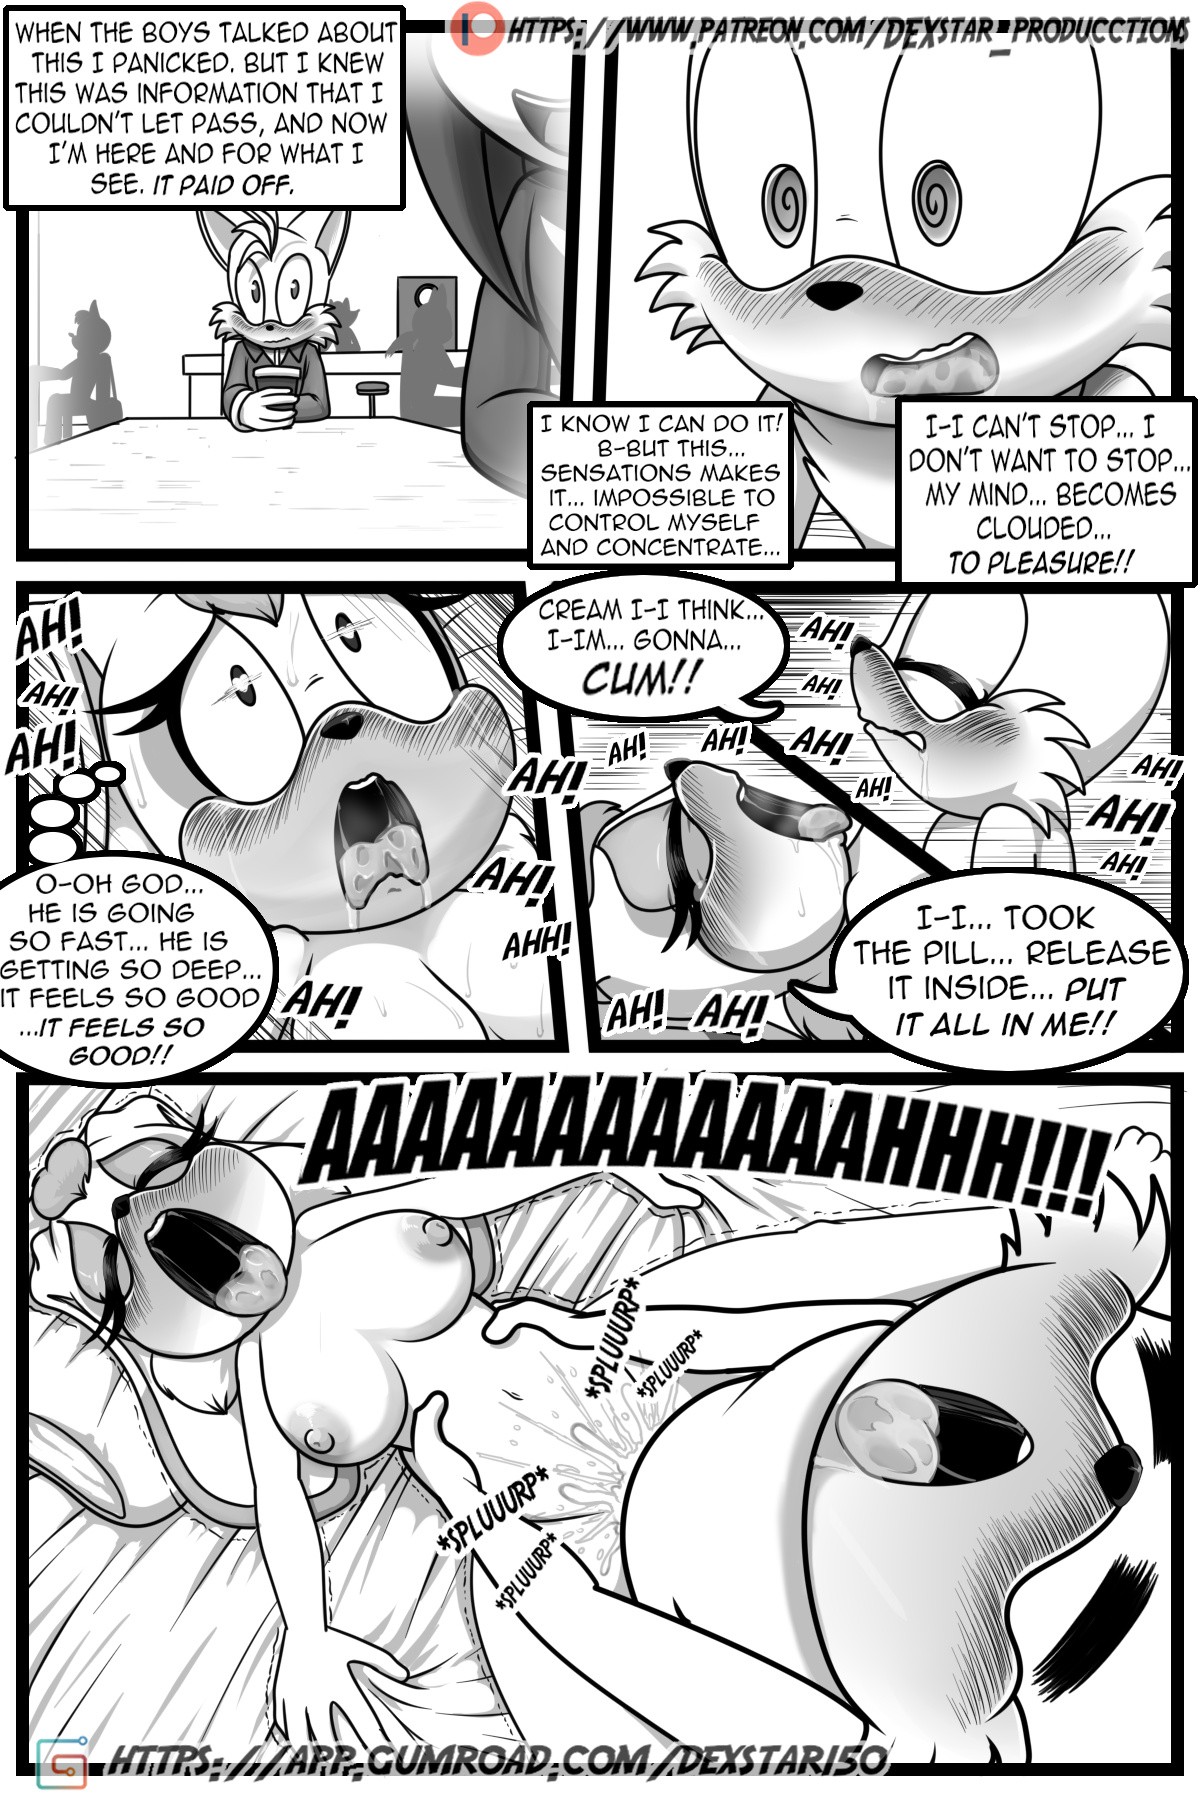 Please Fuck Me: Cream x Tail - Extra Story! porn comic picture 15